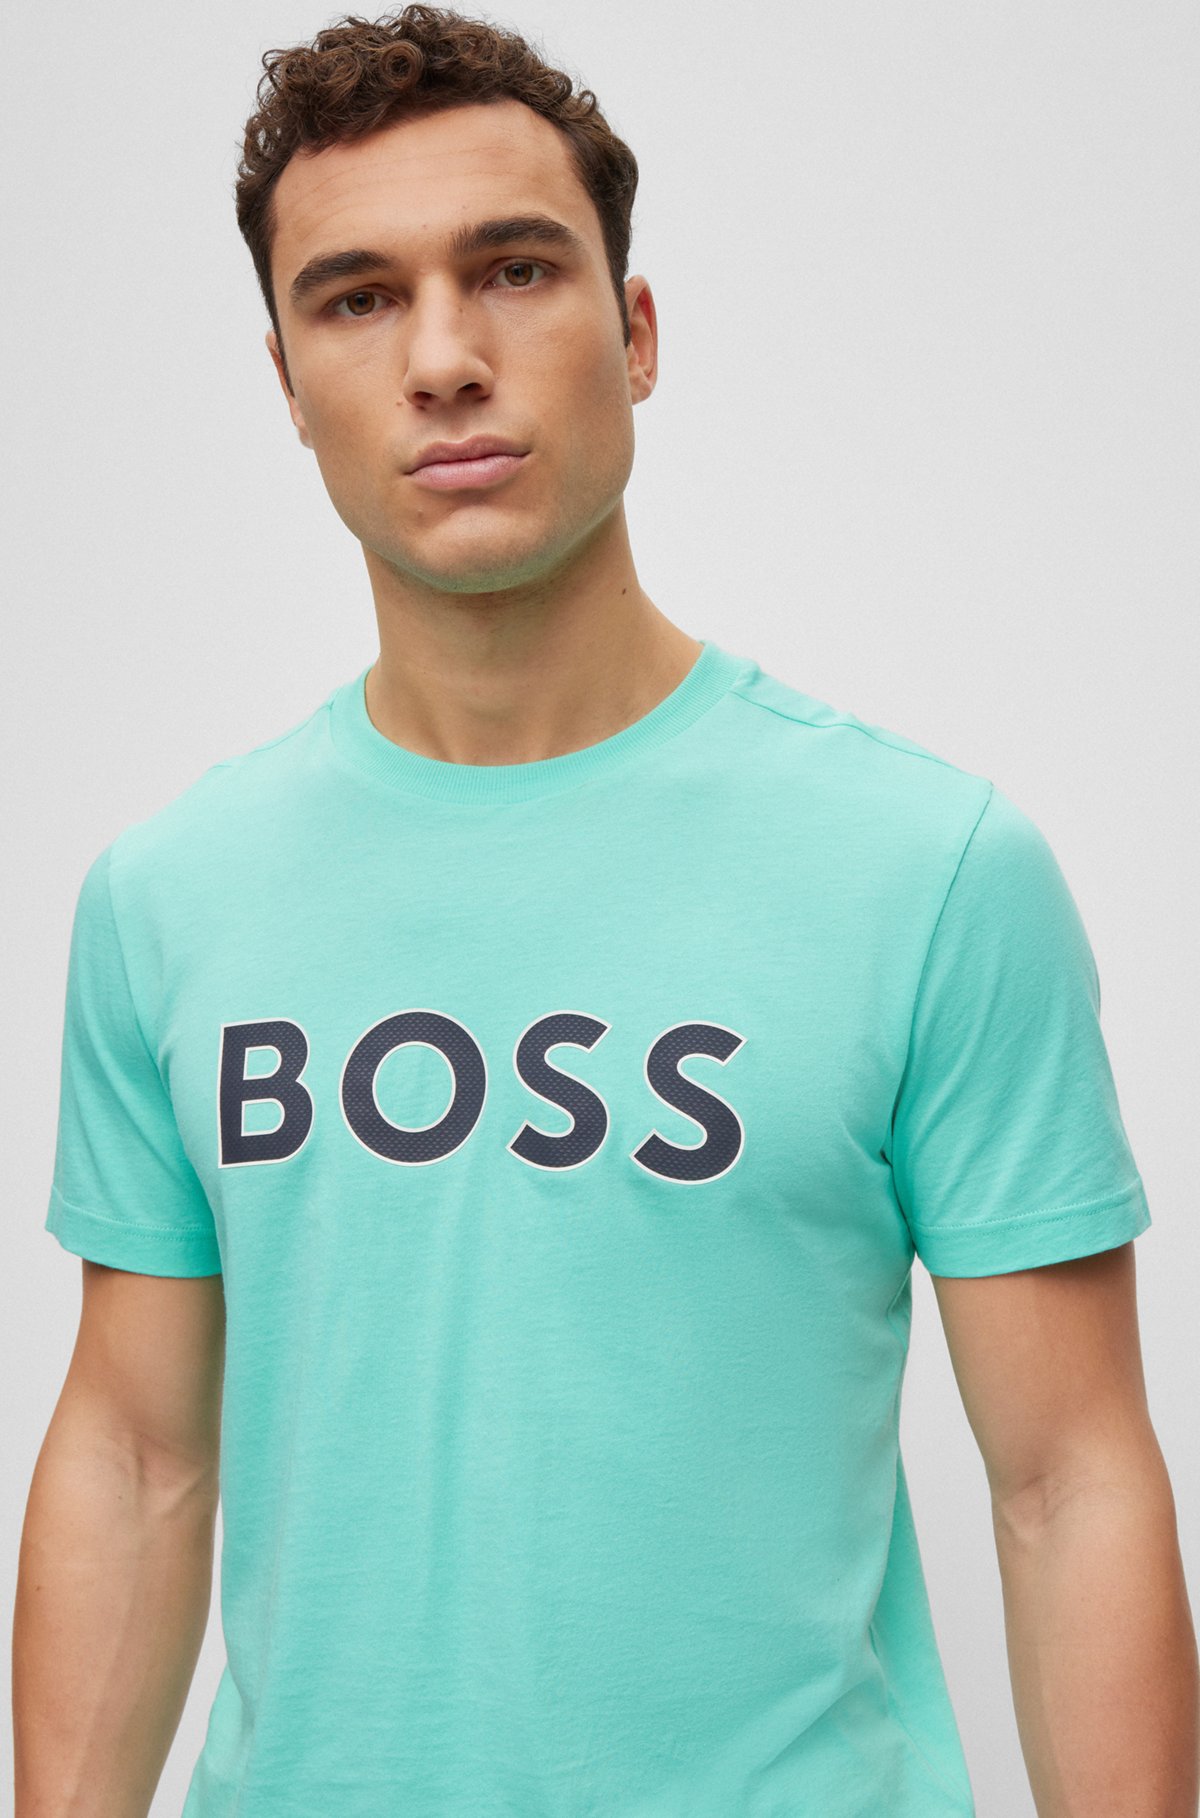 logo Crew-neck in with print T-shirt jersey BOSS cotton -